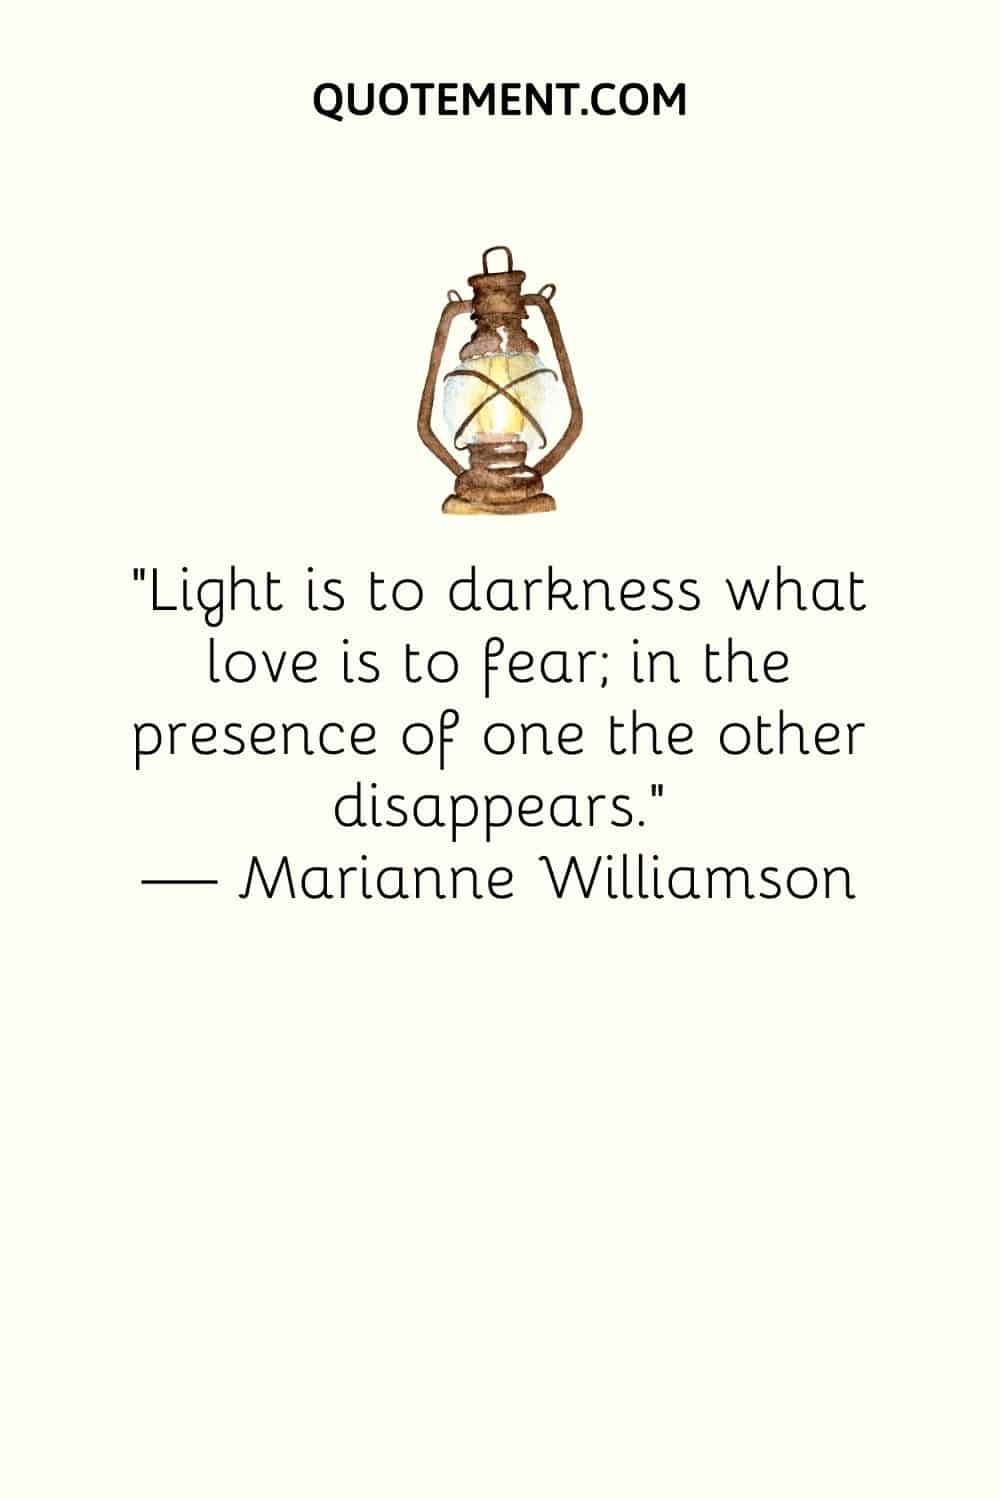 “Light is to darkness what love is to fear; in the presence of one the other disappears.” — Marianne Williamson